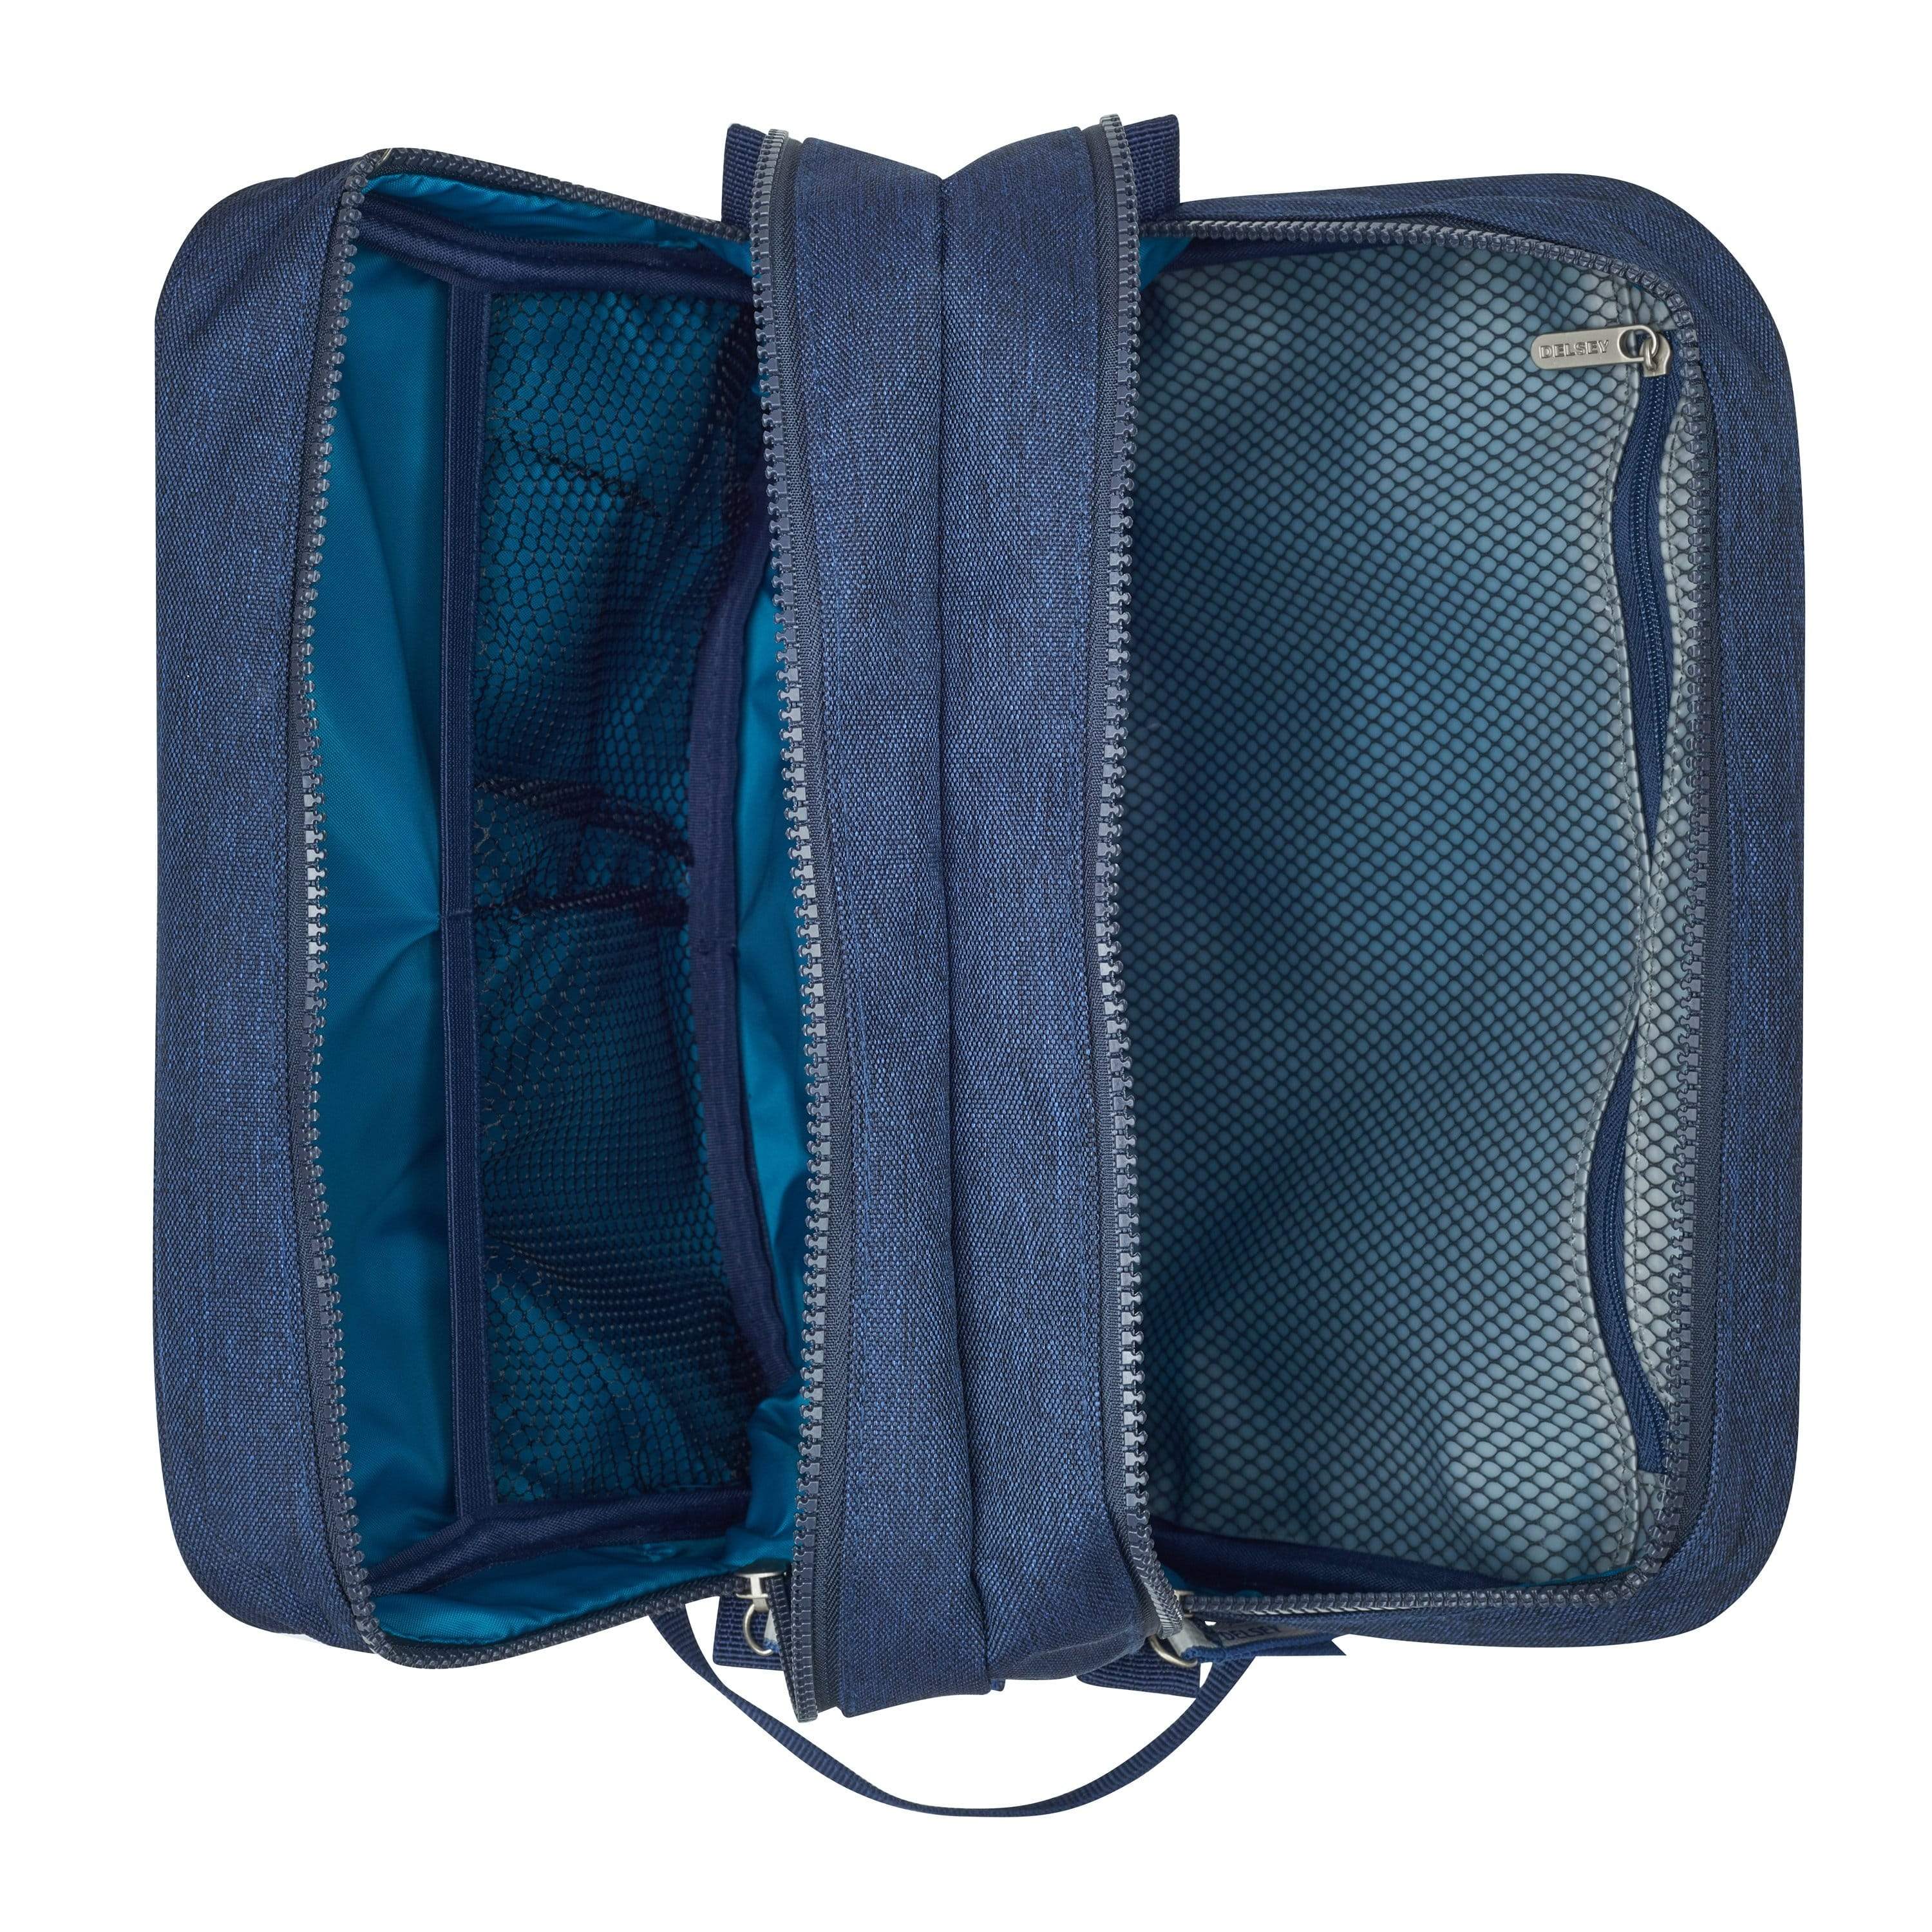 DELSEY ACCESSORY 2.0 - NAVY